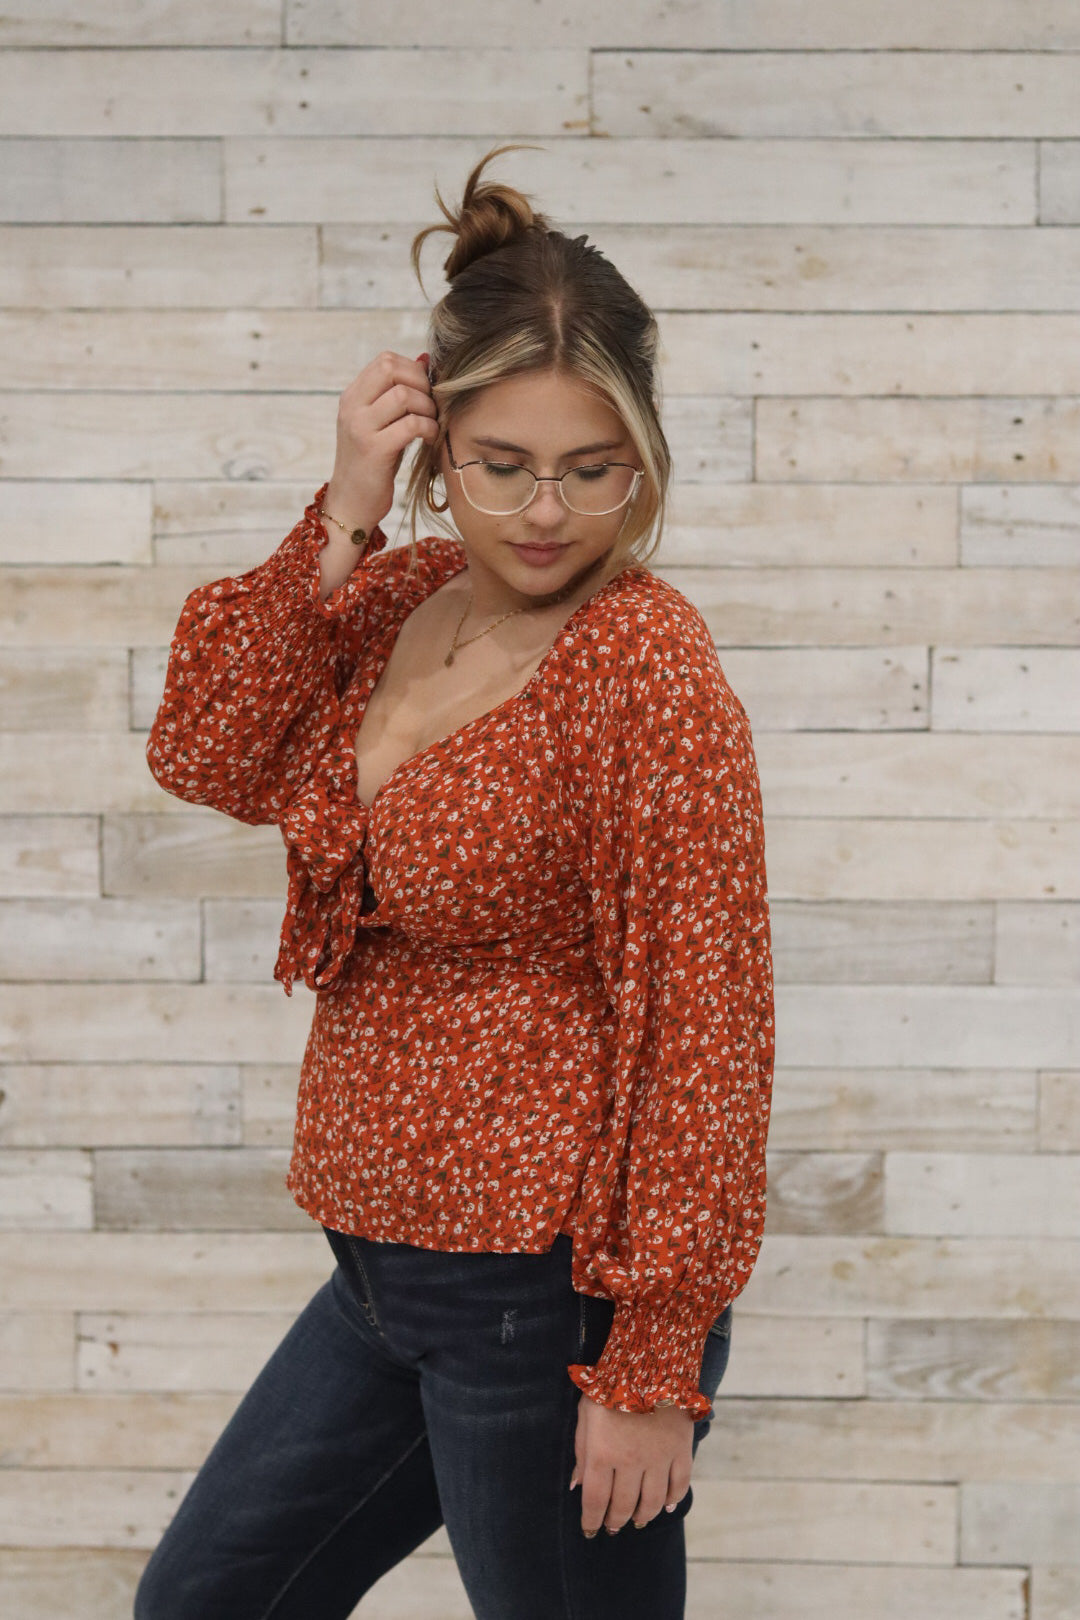 Boho Floral Print Front Tie Ruffled Long Sleeve Blouse